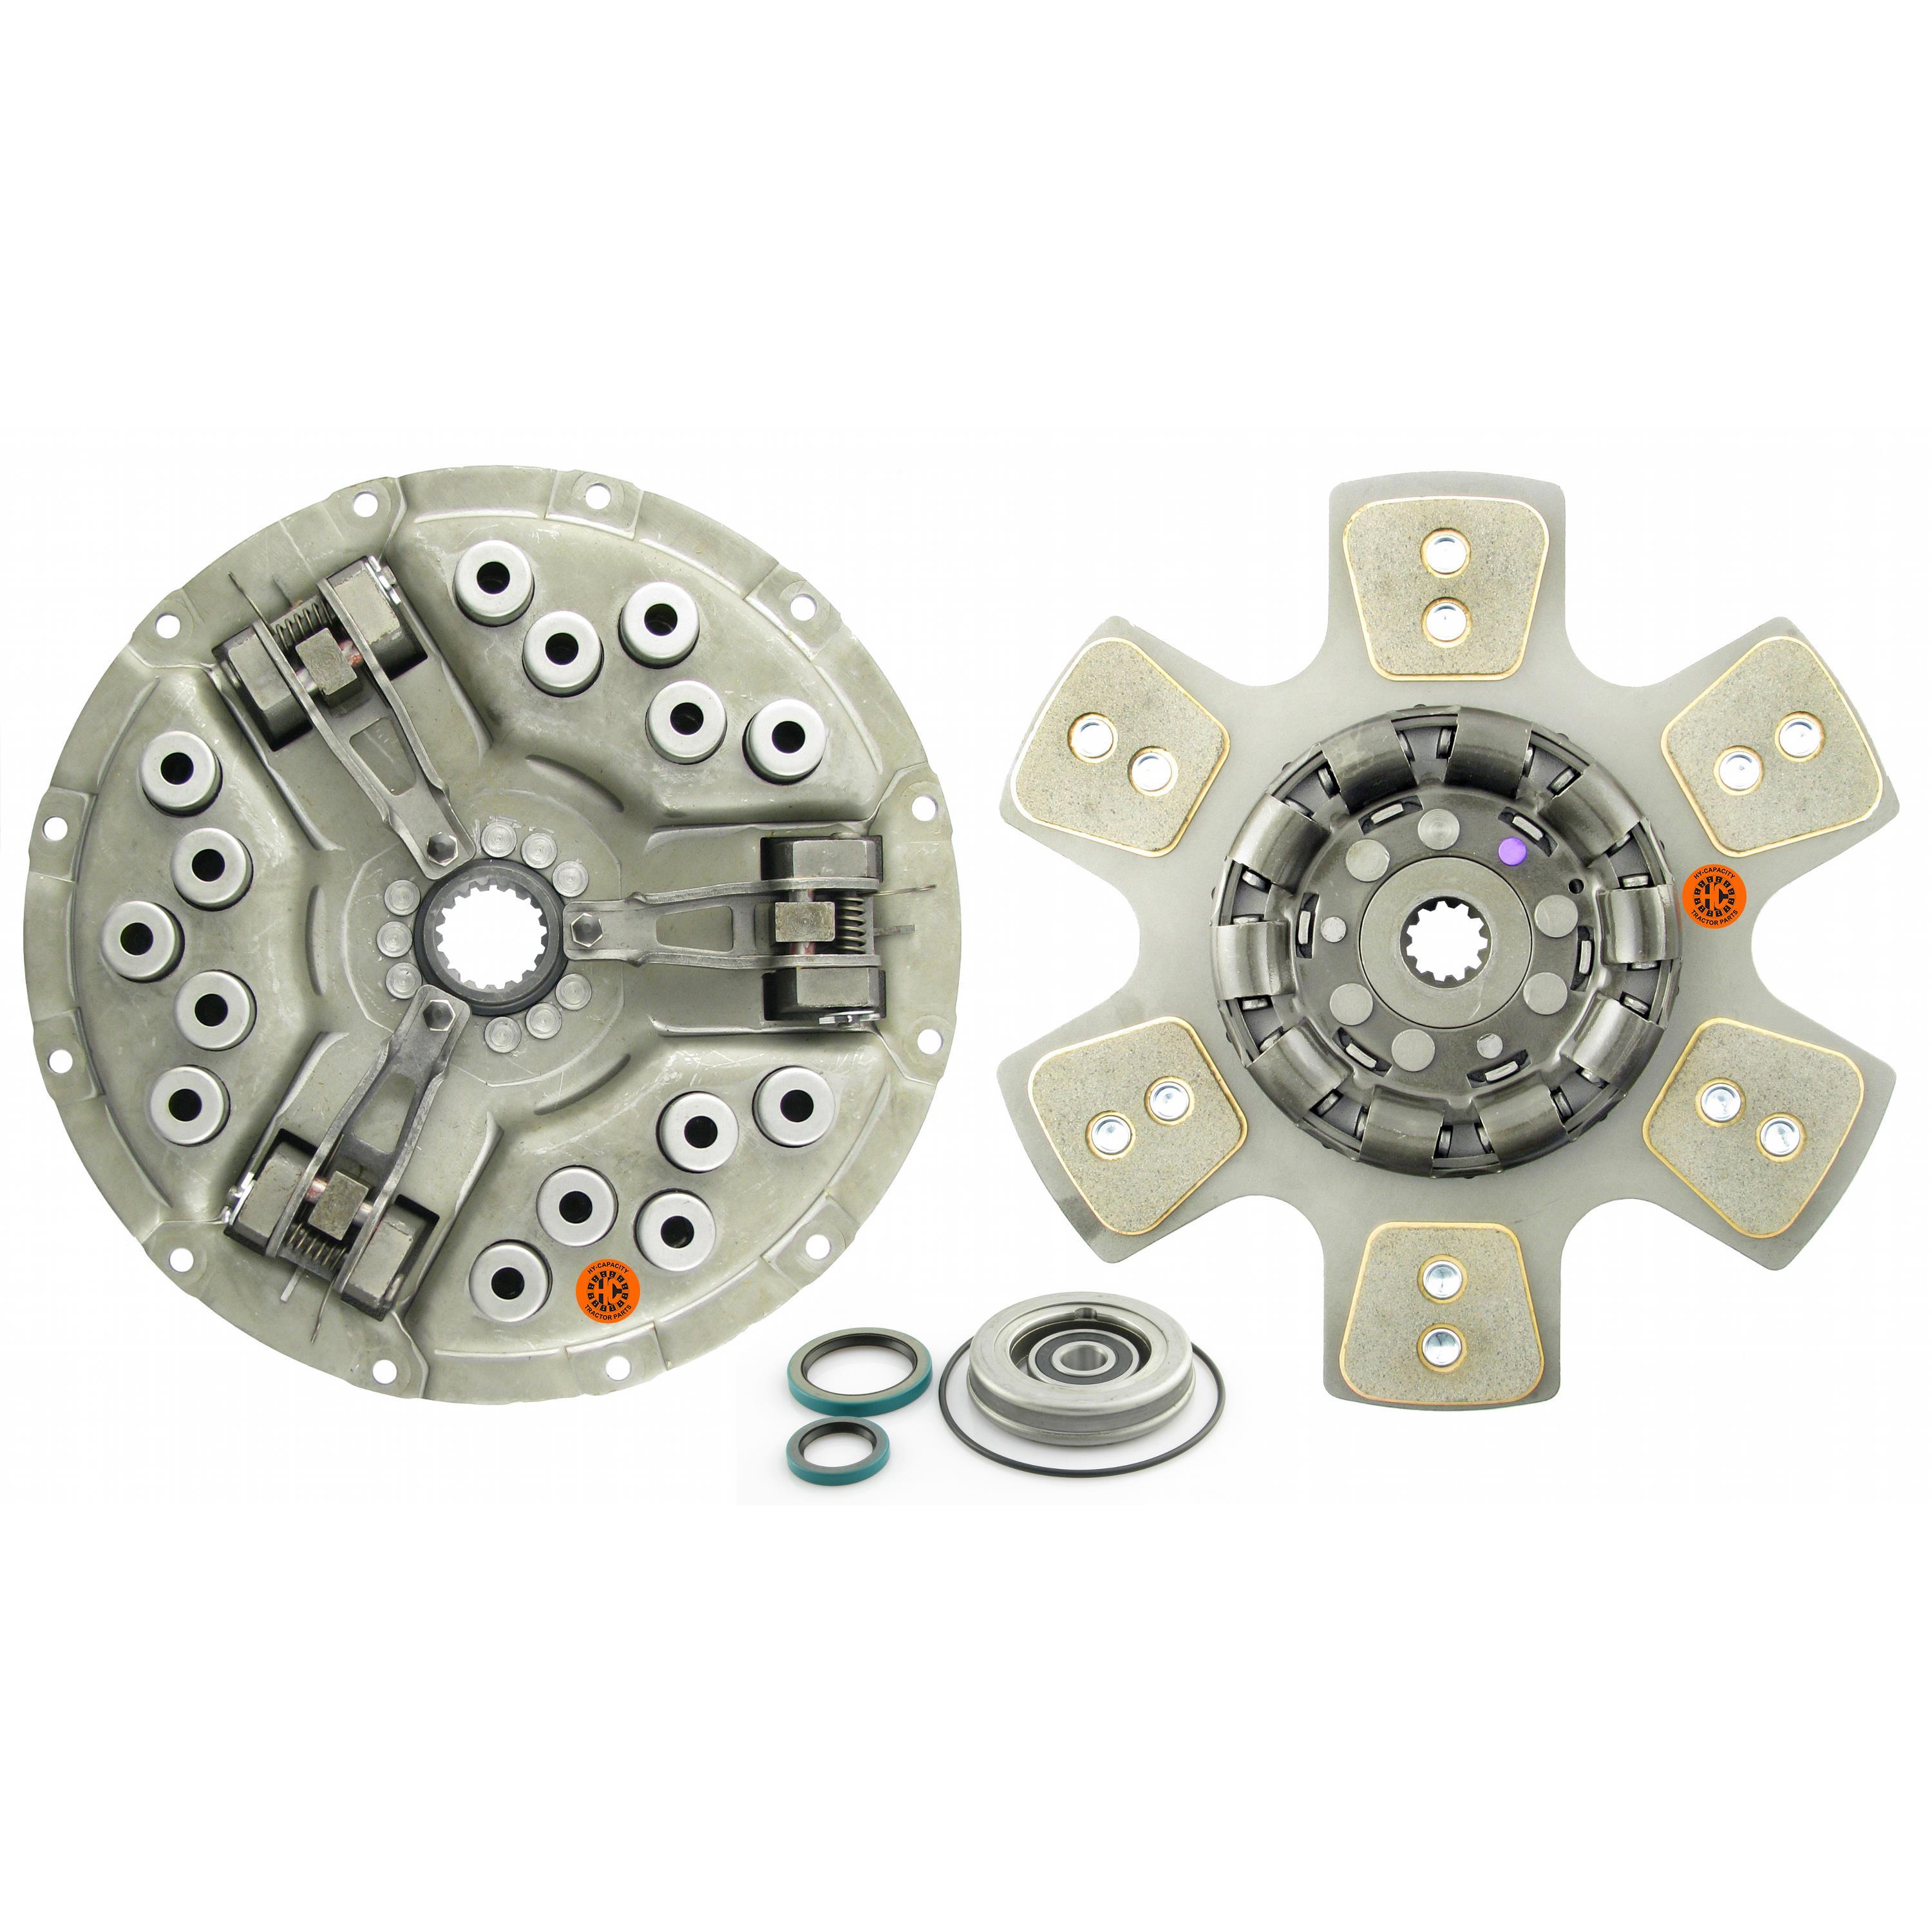 14" Single Stage Clutch Kit, w/ 6 Large Pad Disc, Bearings & Seals, Heavy Spring Pressure - Reman